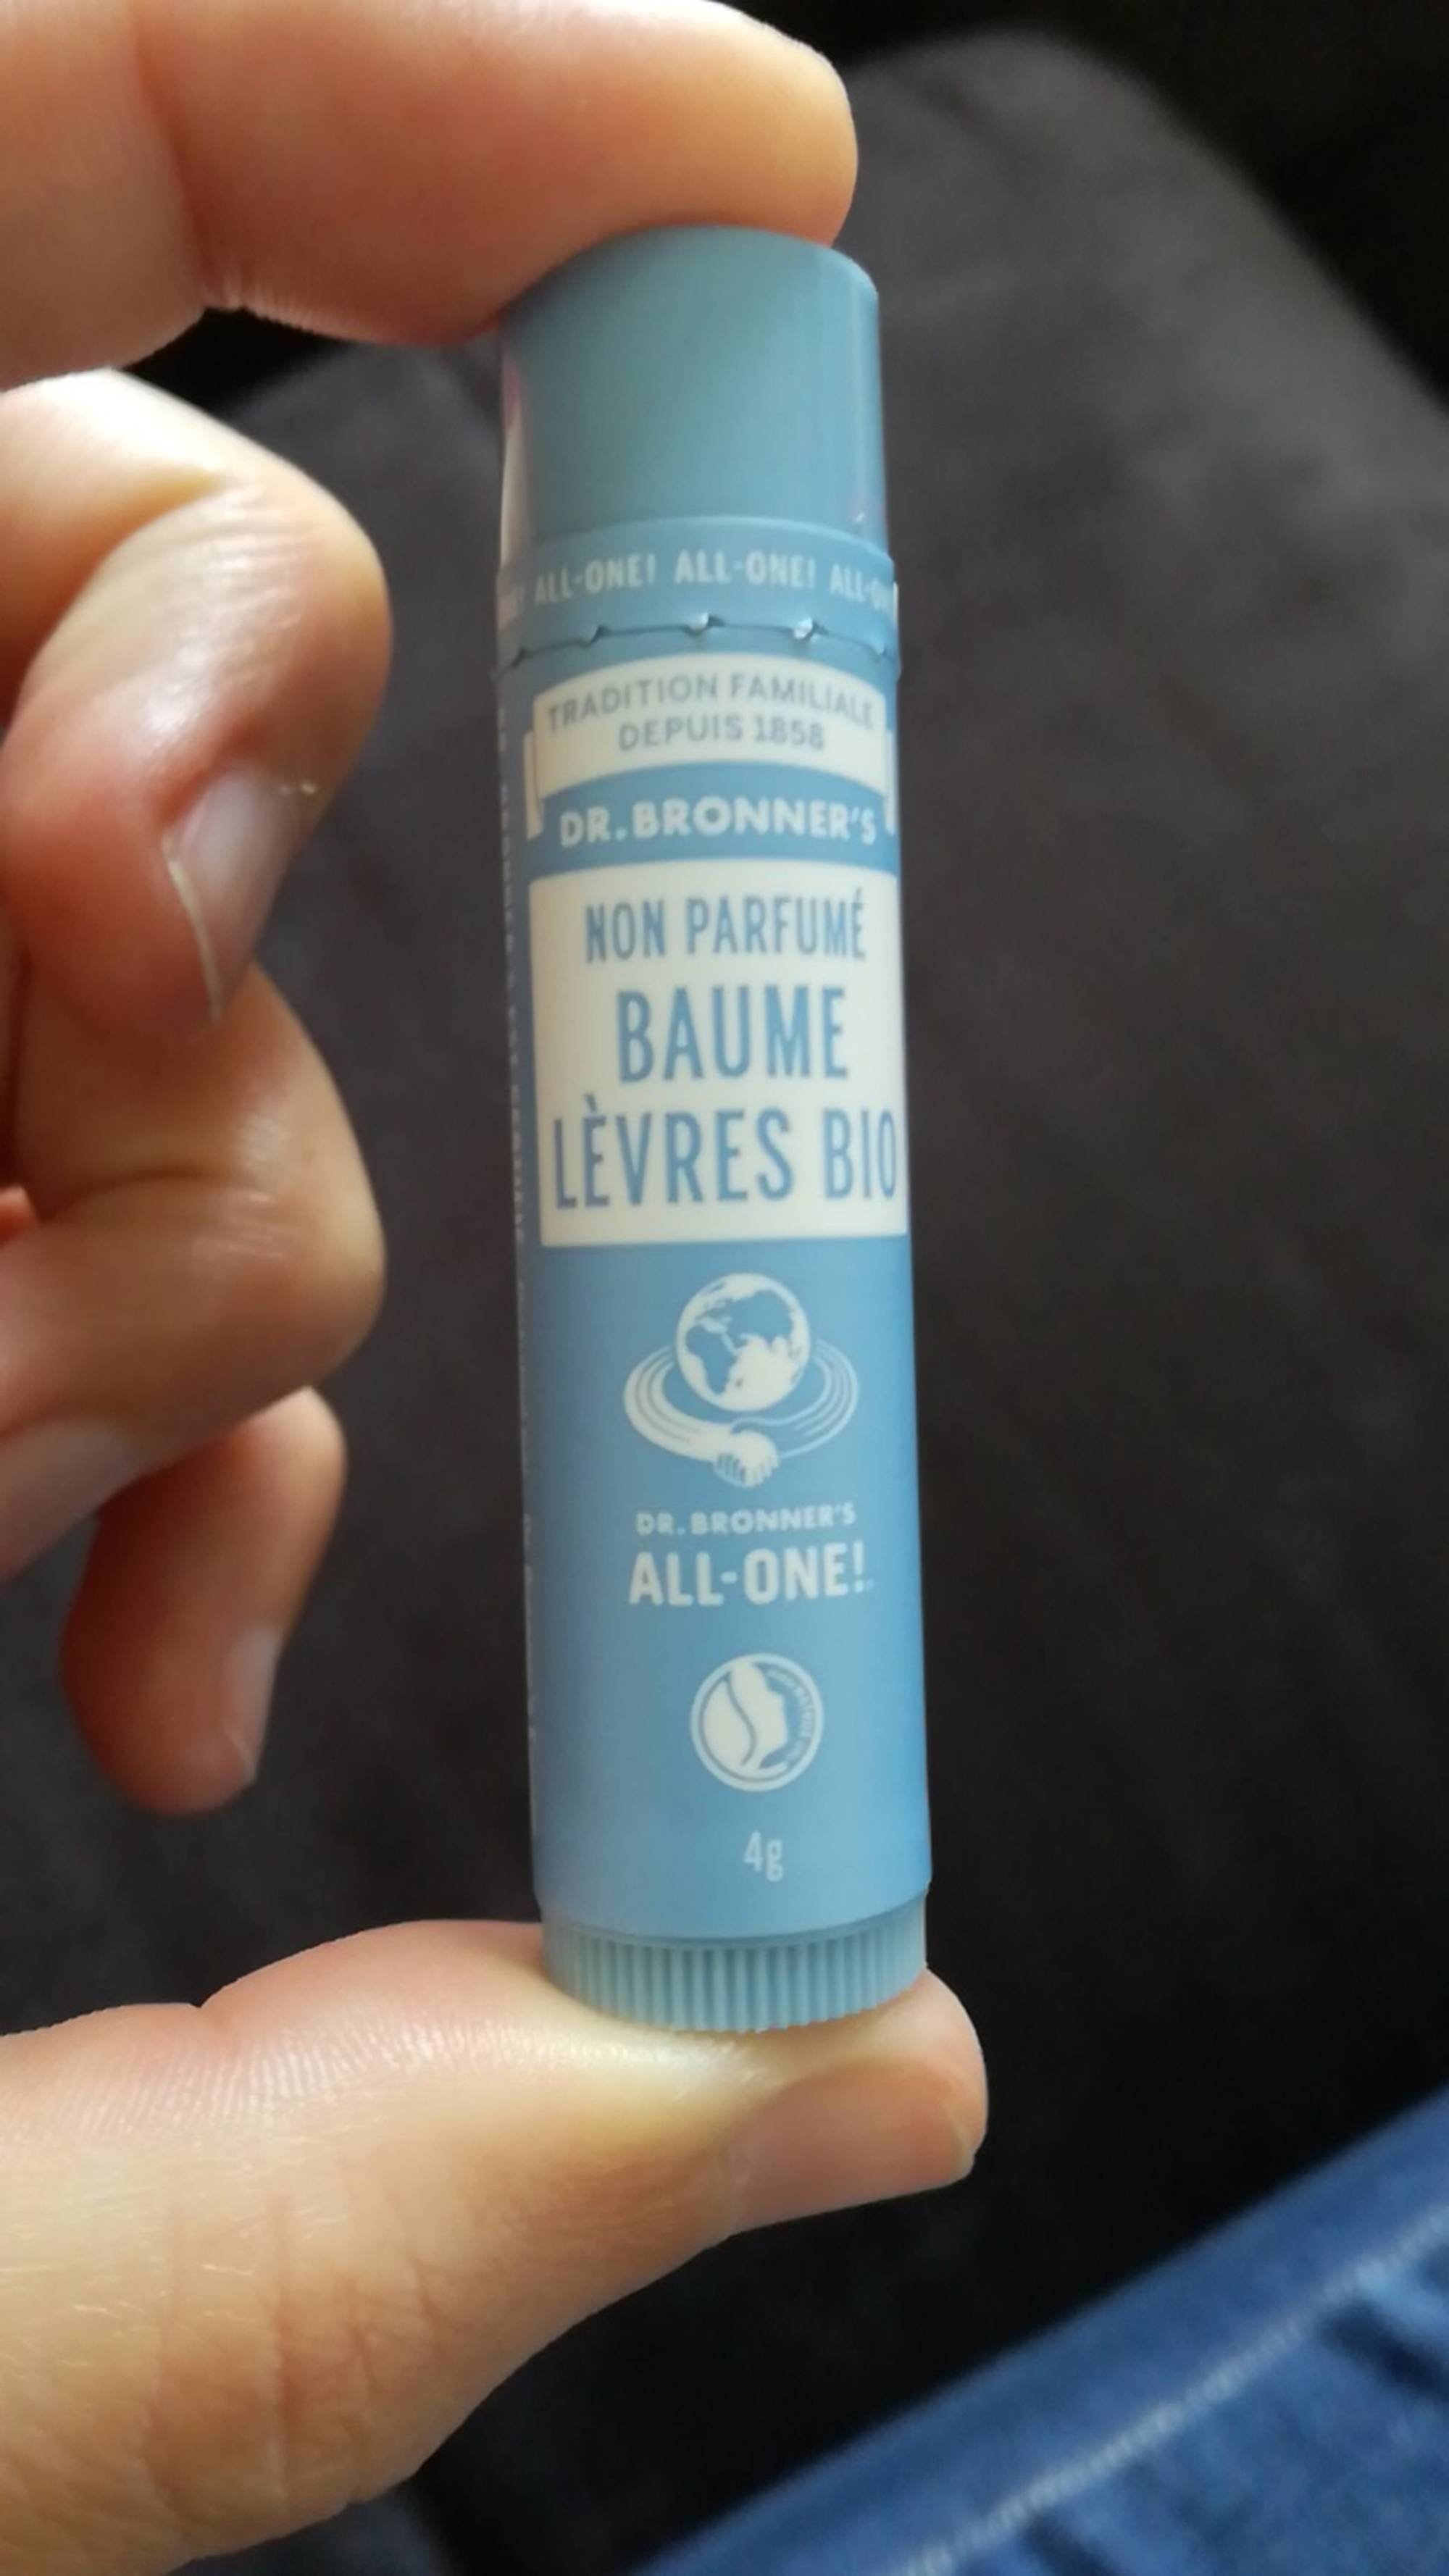 DR. BRONNER'S - All-one ! - Baume lèvres bio